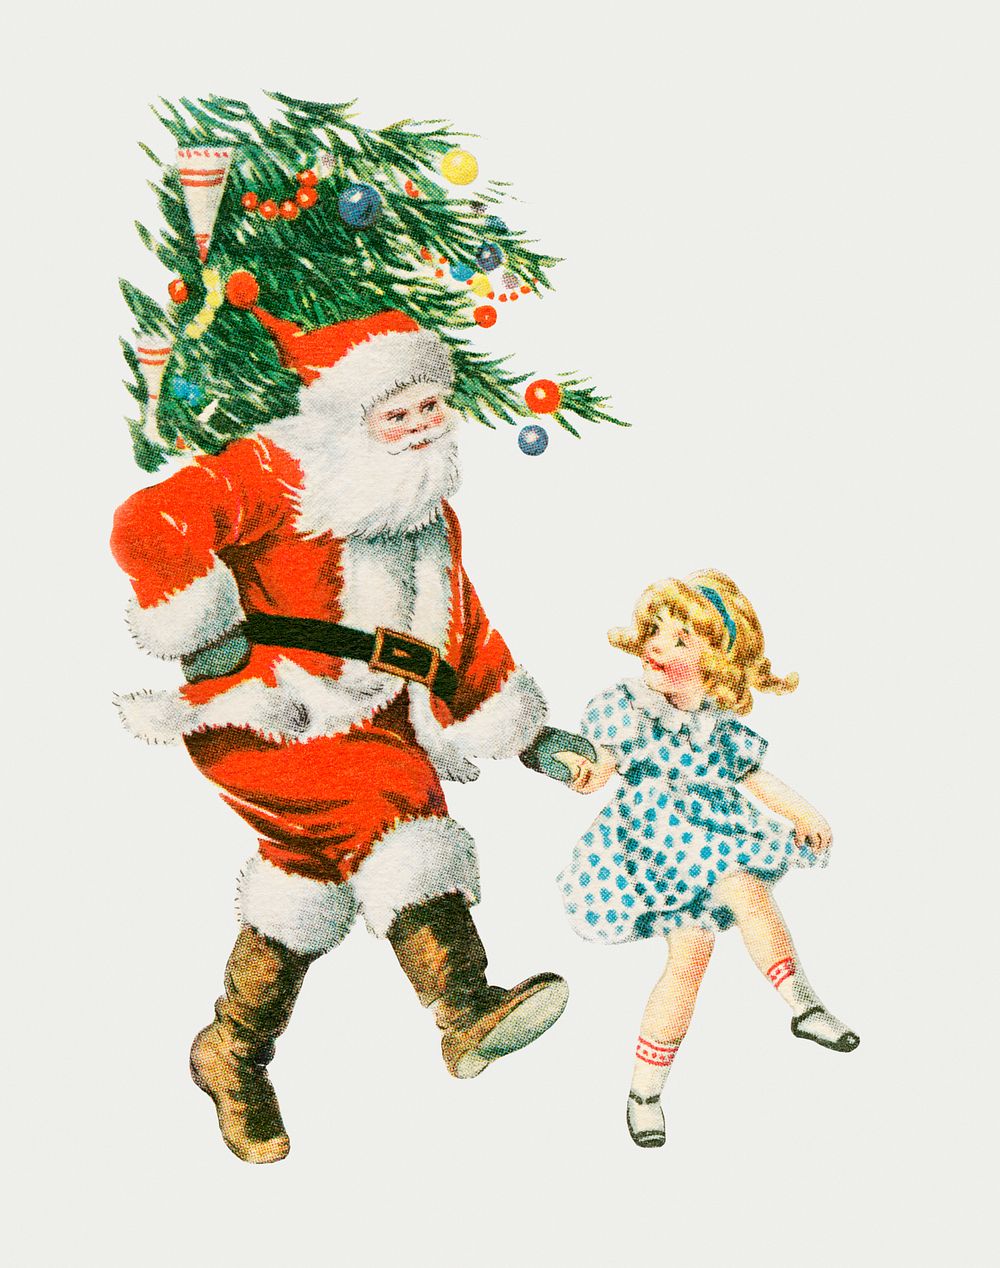 Santa Claus dancing with a little girl merrily to celebrate Christmas